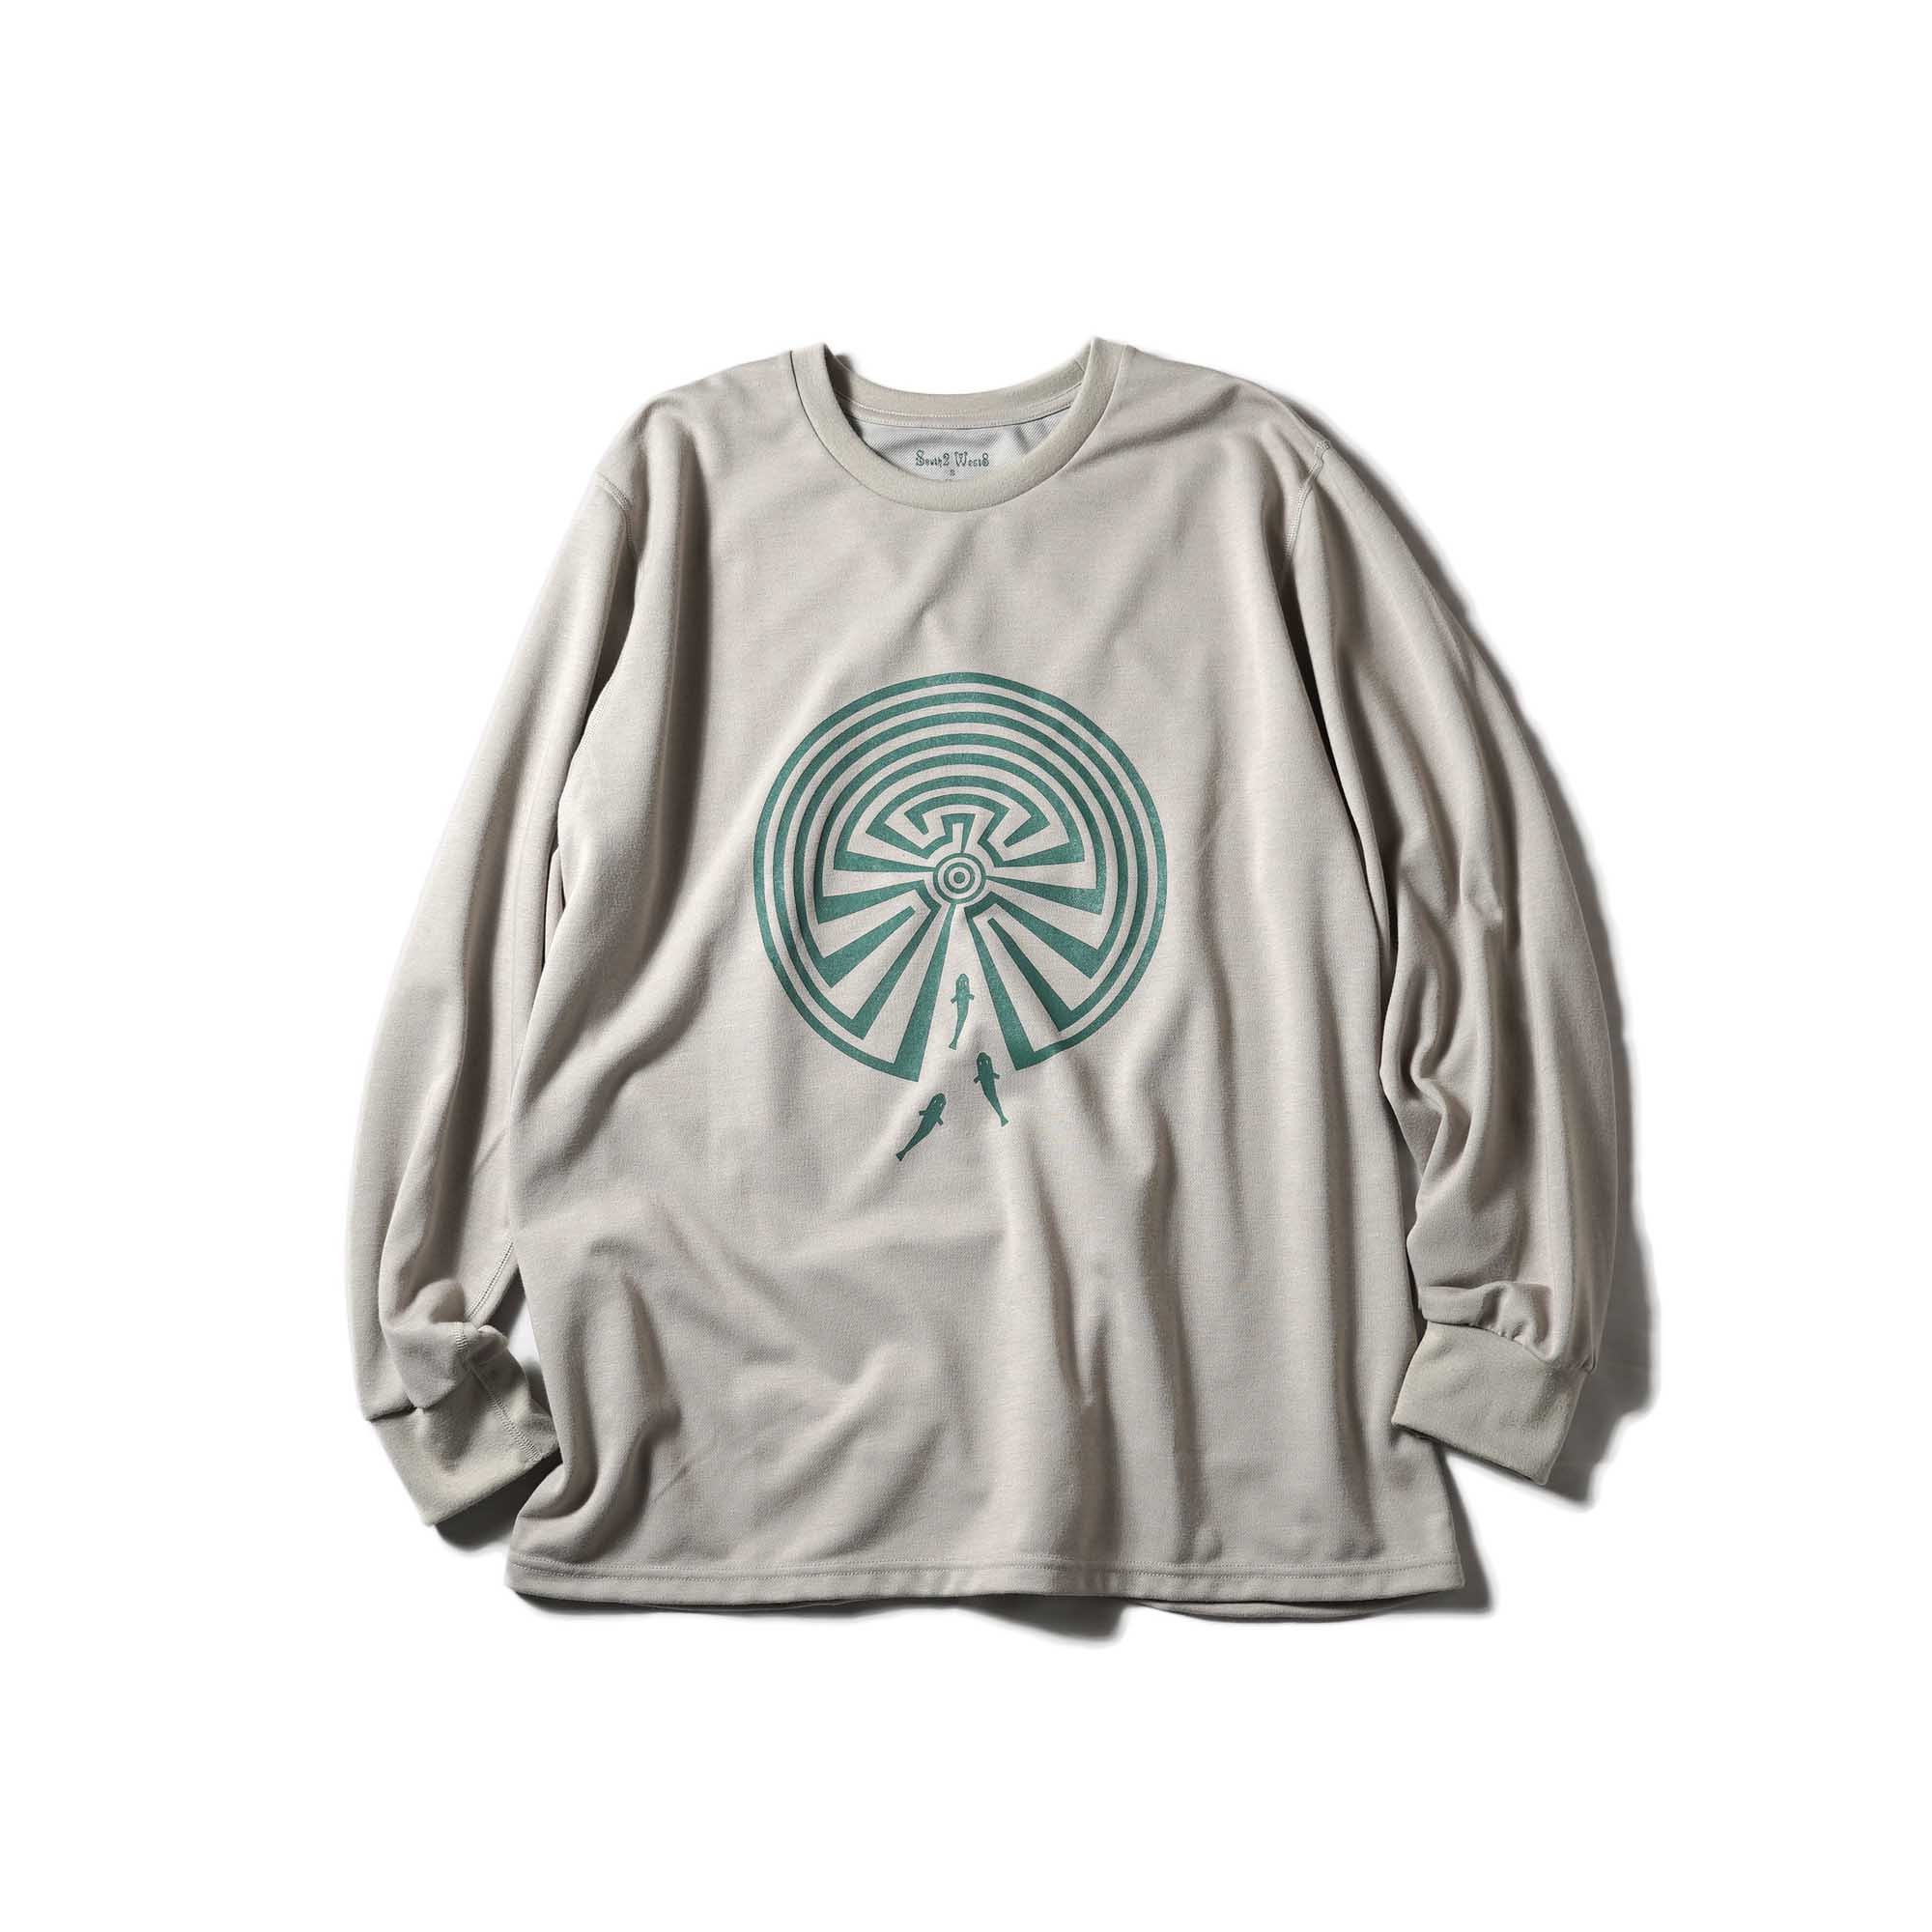 South2 West8 / L/S Crew Neck Tee - MAZE (Taupe)